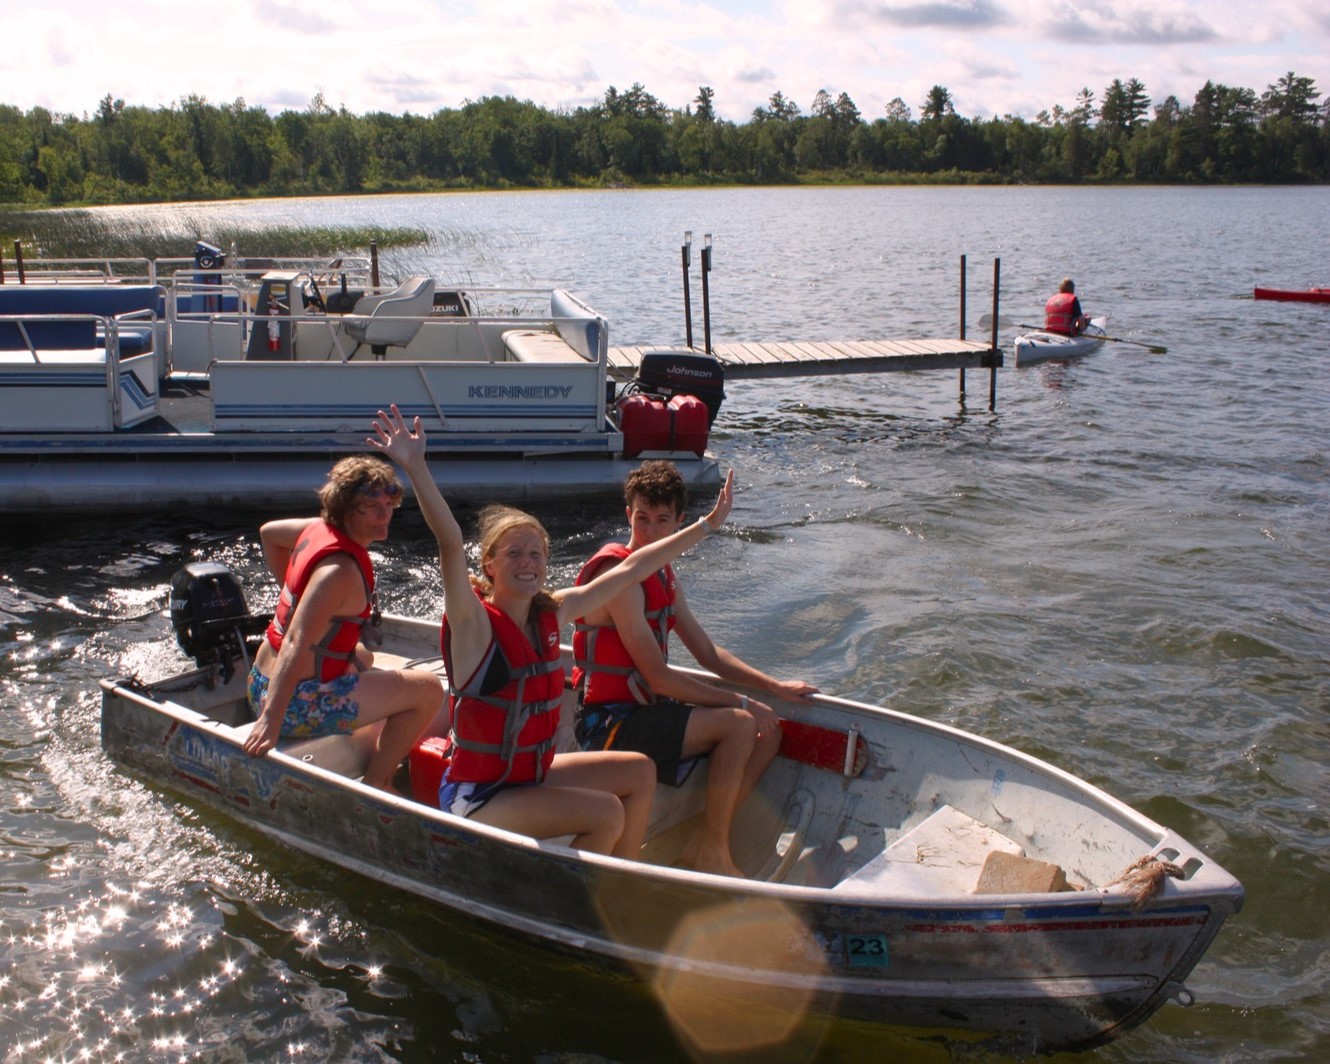 A staff member and two smiling Scouts are taking off in a motor boat